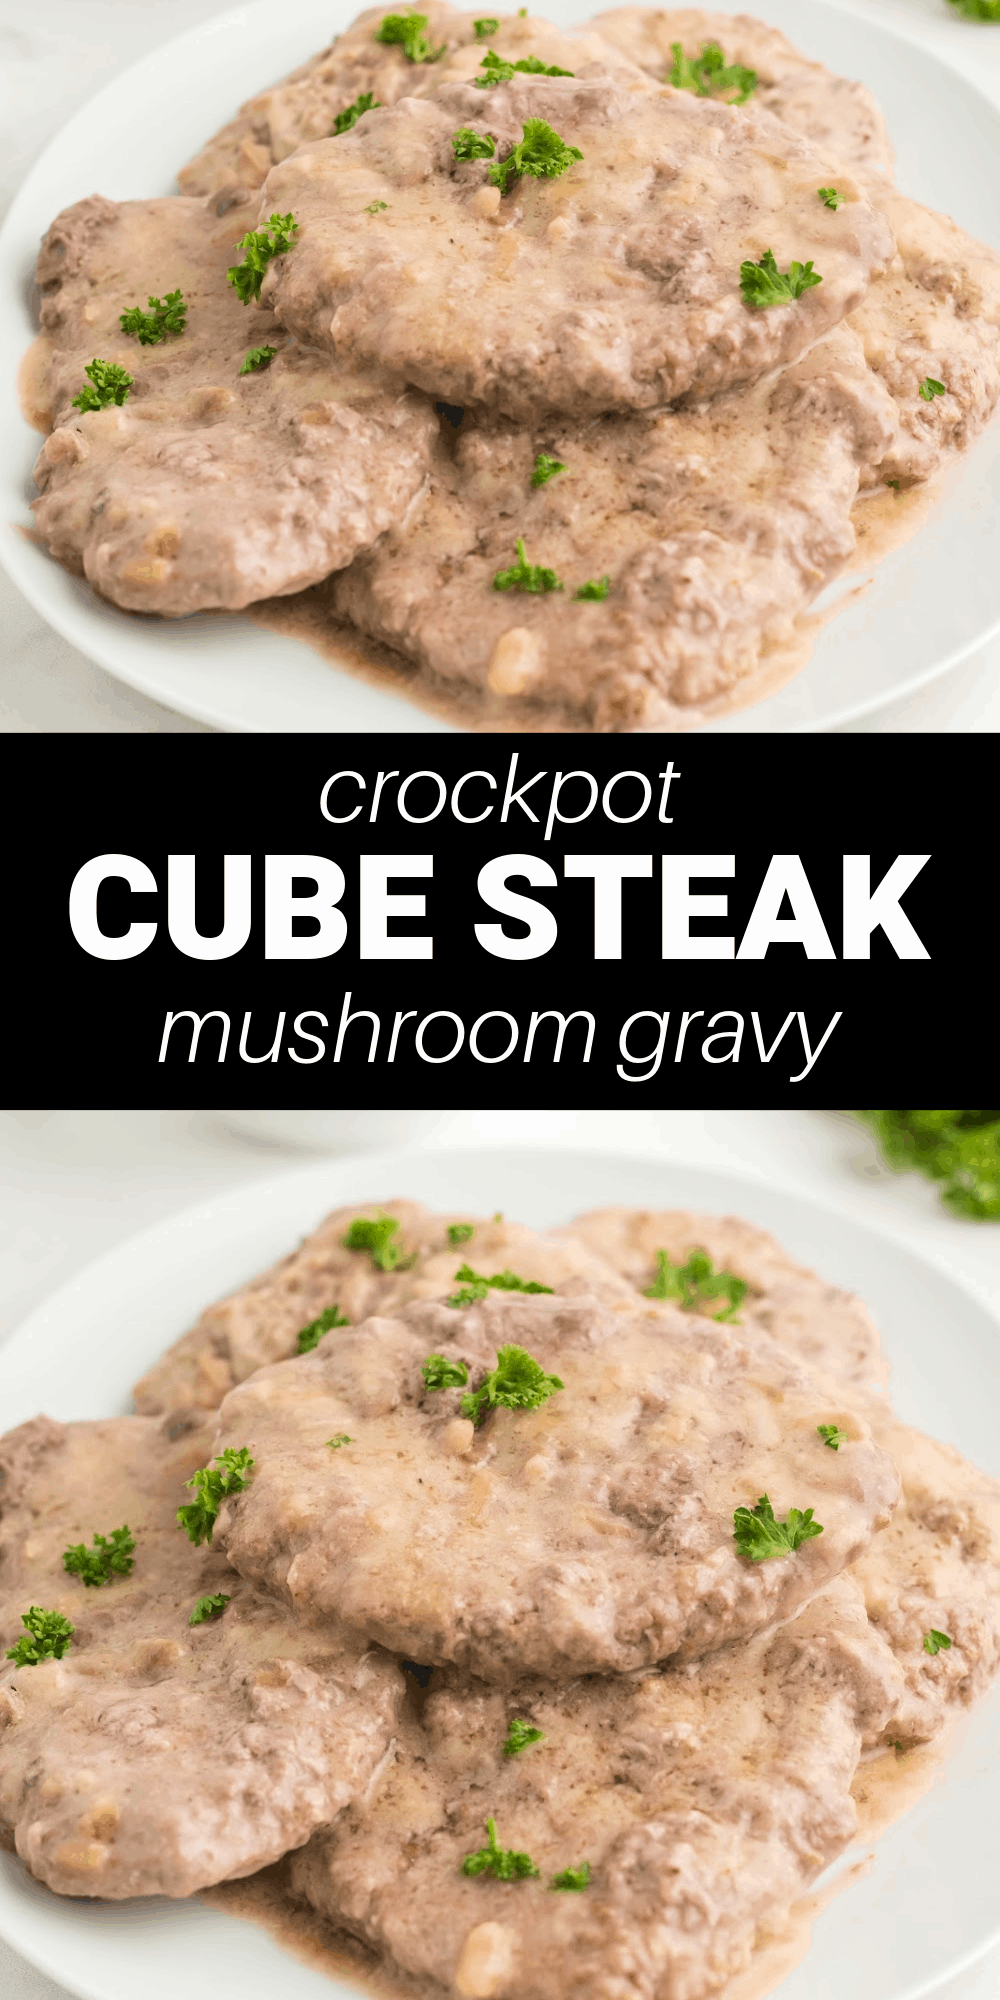 With just 6 simple ingredients, this Crockpot Cube Steak with Mushroom Gravy is a fast and easy dinner recipe for the family. Season the cube steak in the frying pan and then set it in the crockpot with mushroom soup and onion soup mix that makes the most amazing brown gravy.